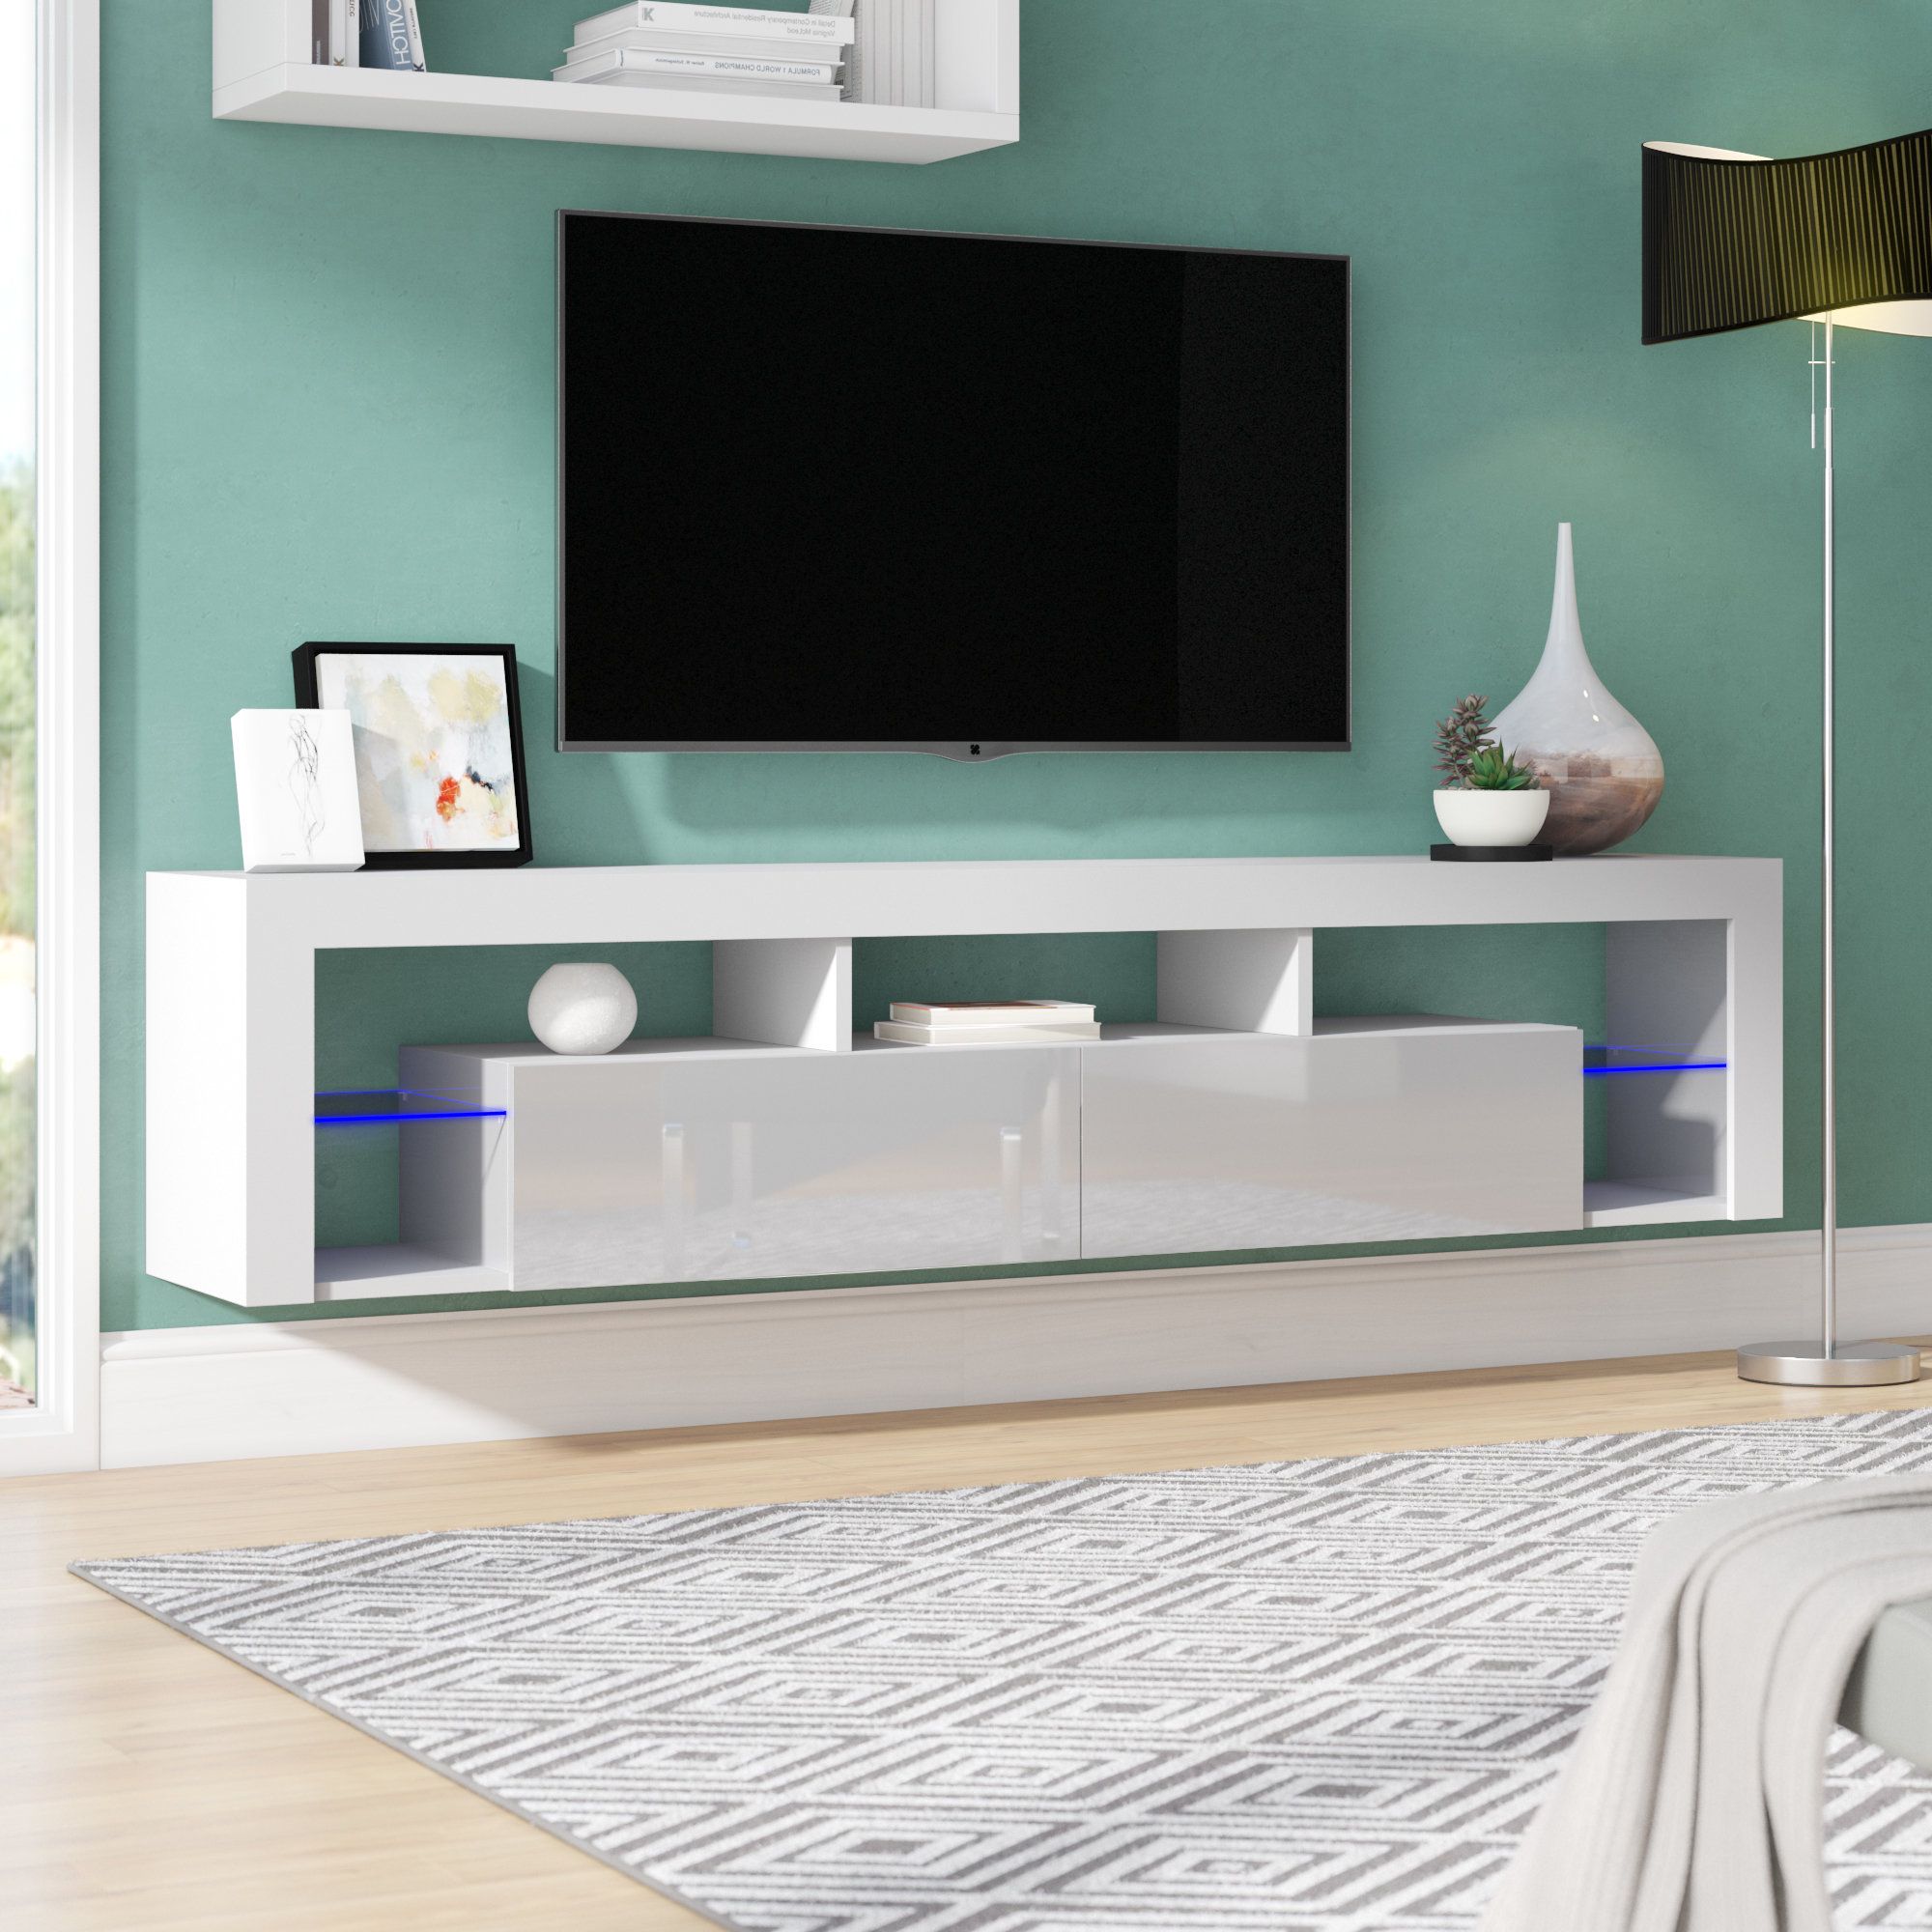 Orren Ellis Böttcher Wall Mounted Floating Tv Stand For Tvs Up To 88 Pertaining To Well Known Floating Tv Cabinets (View 11 of 20)